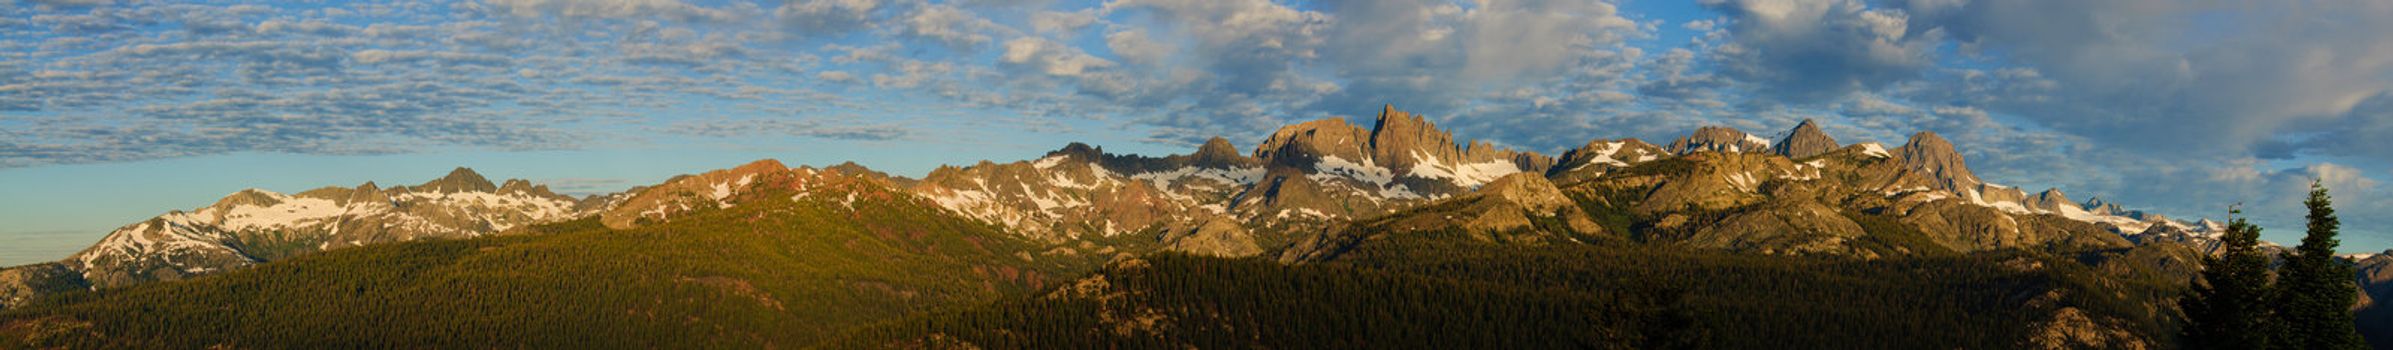 Panoramic view of the Minarets a group of mountains in the Sierra Nevadas in California